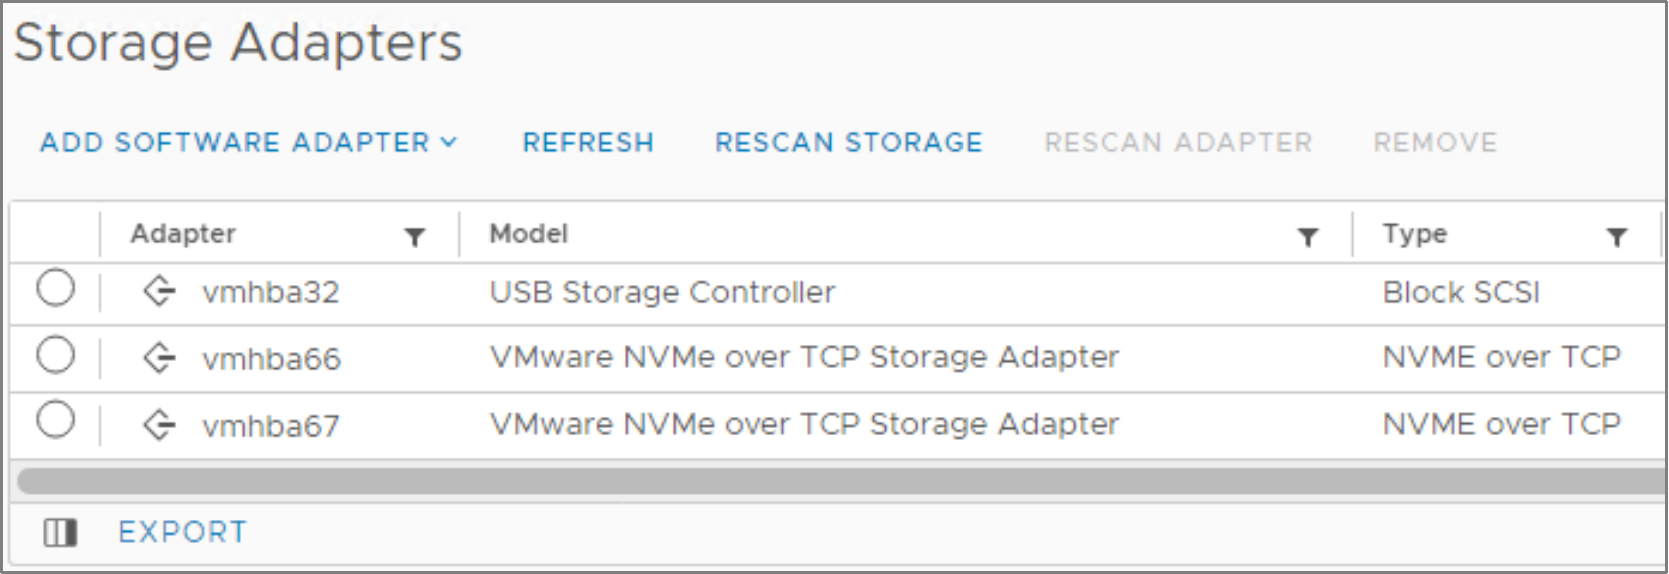 Storage adapters in the vSphere Client.